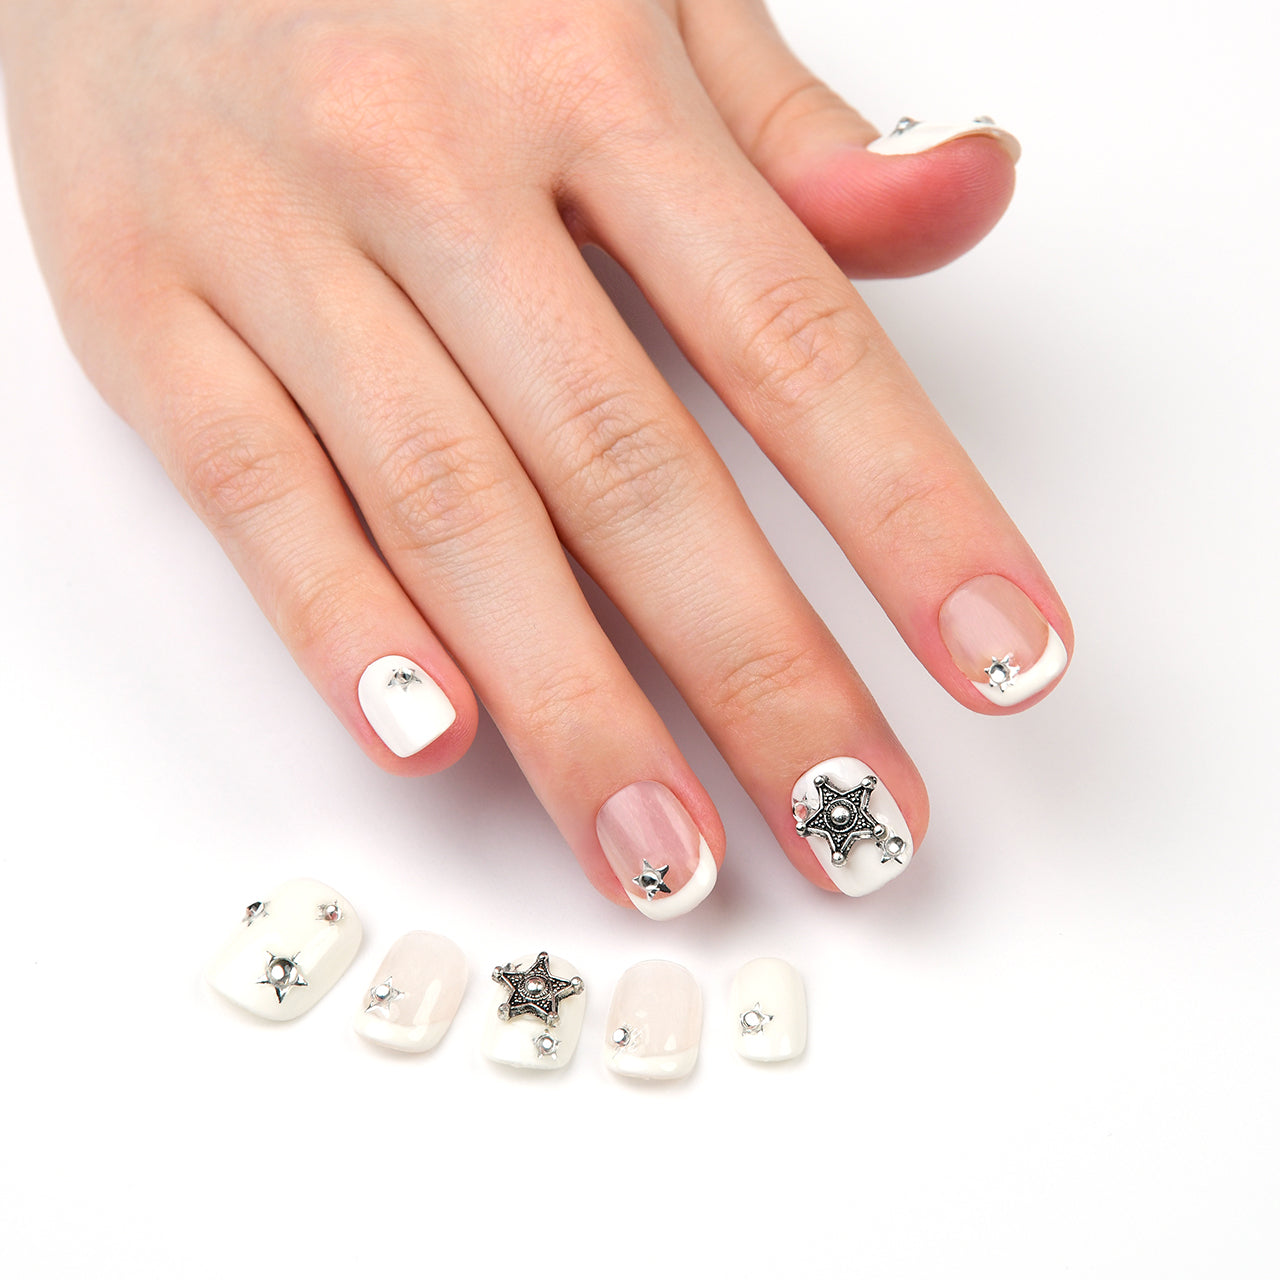 French Antique Stars Squoval Short Arcylic Handmade Press On Nails With Pearls -BEYONDCANVA